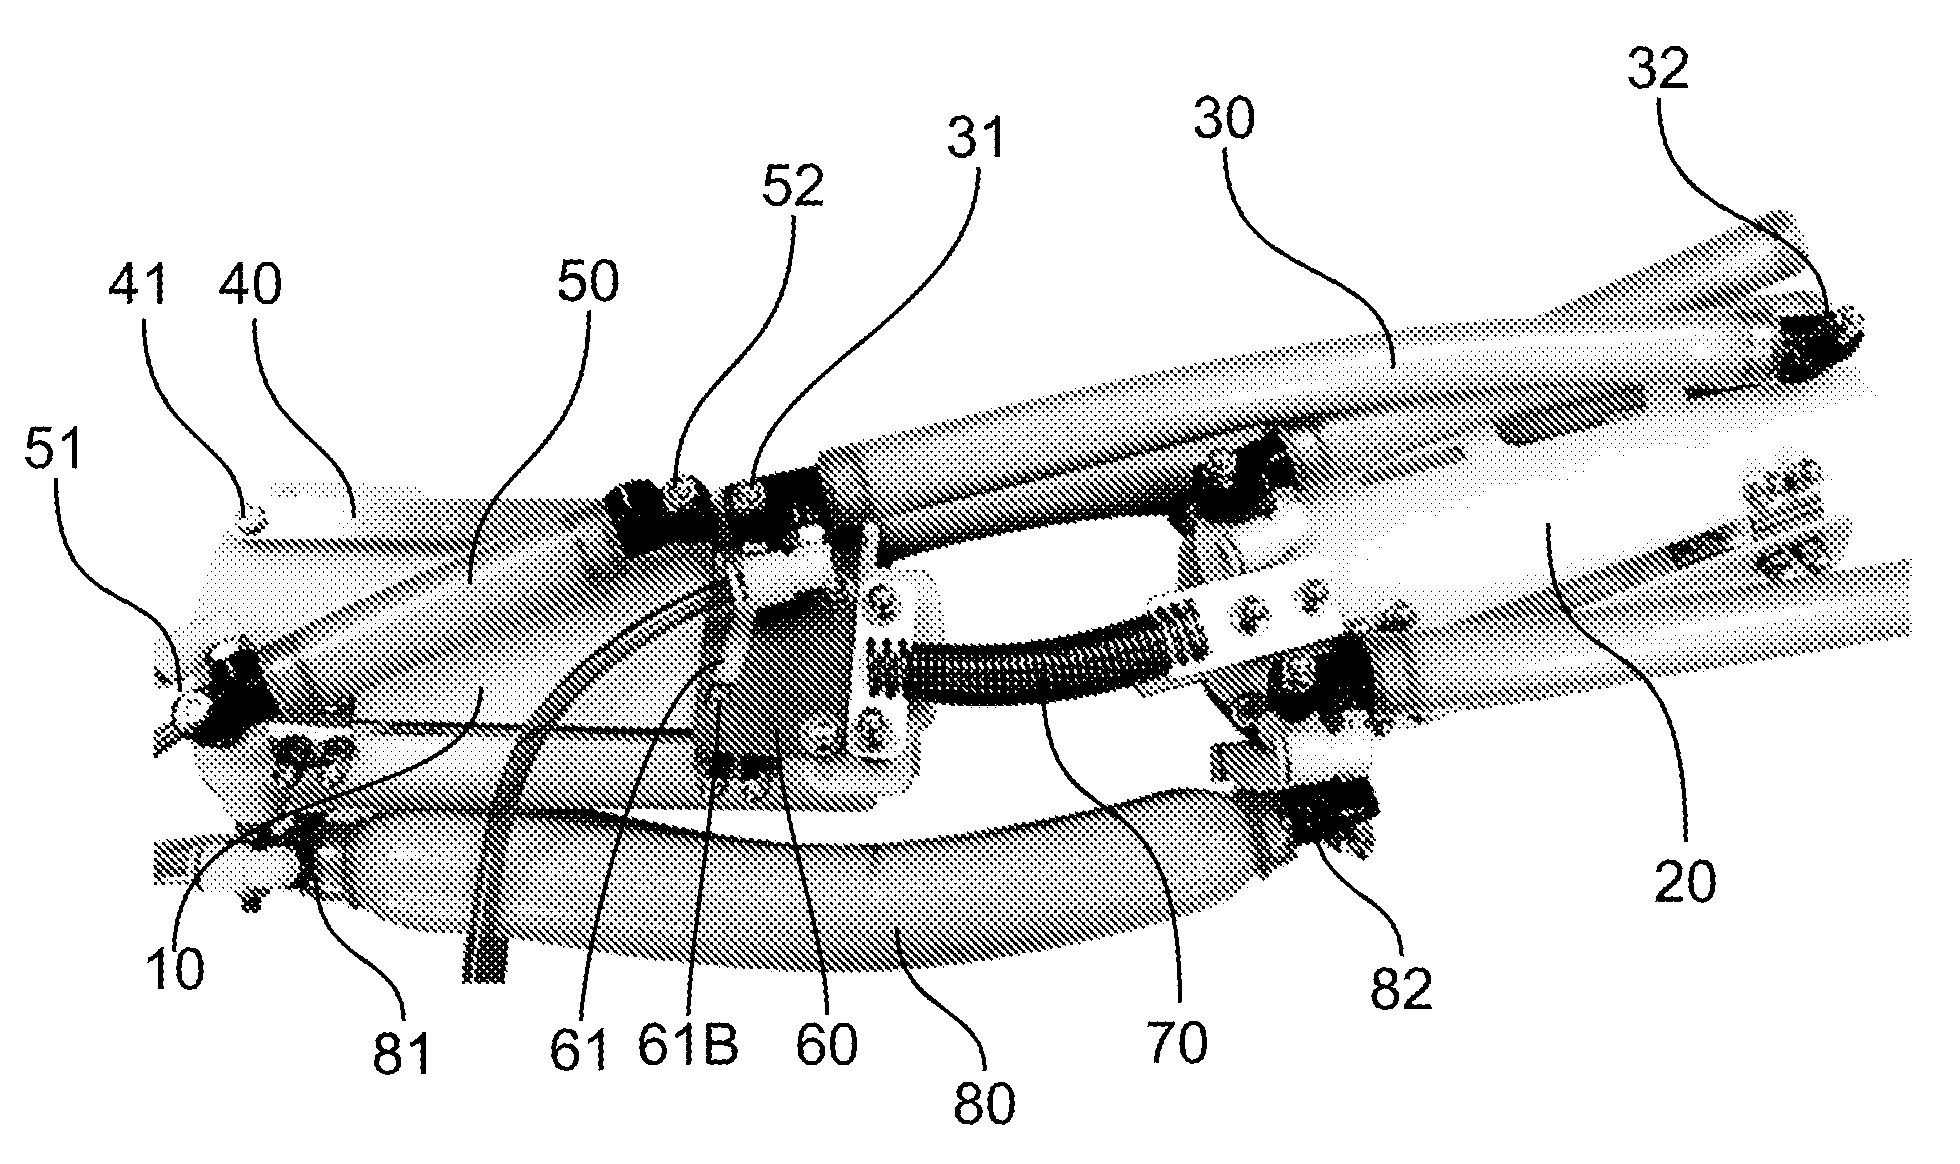 Muscle force assisting device